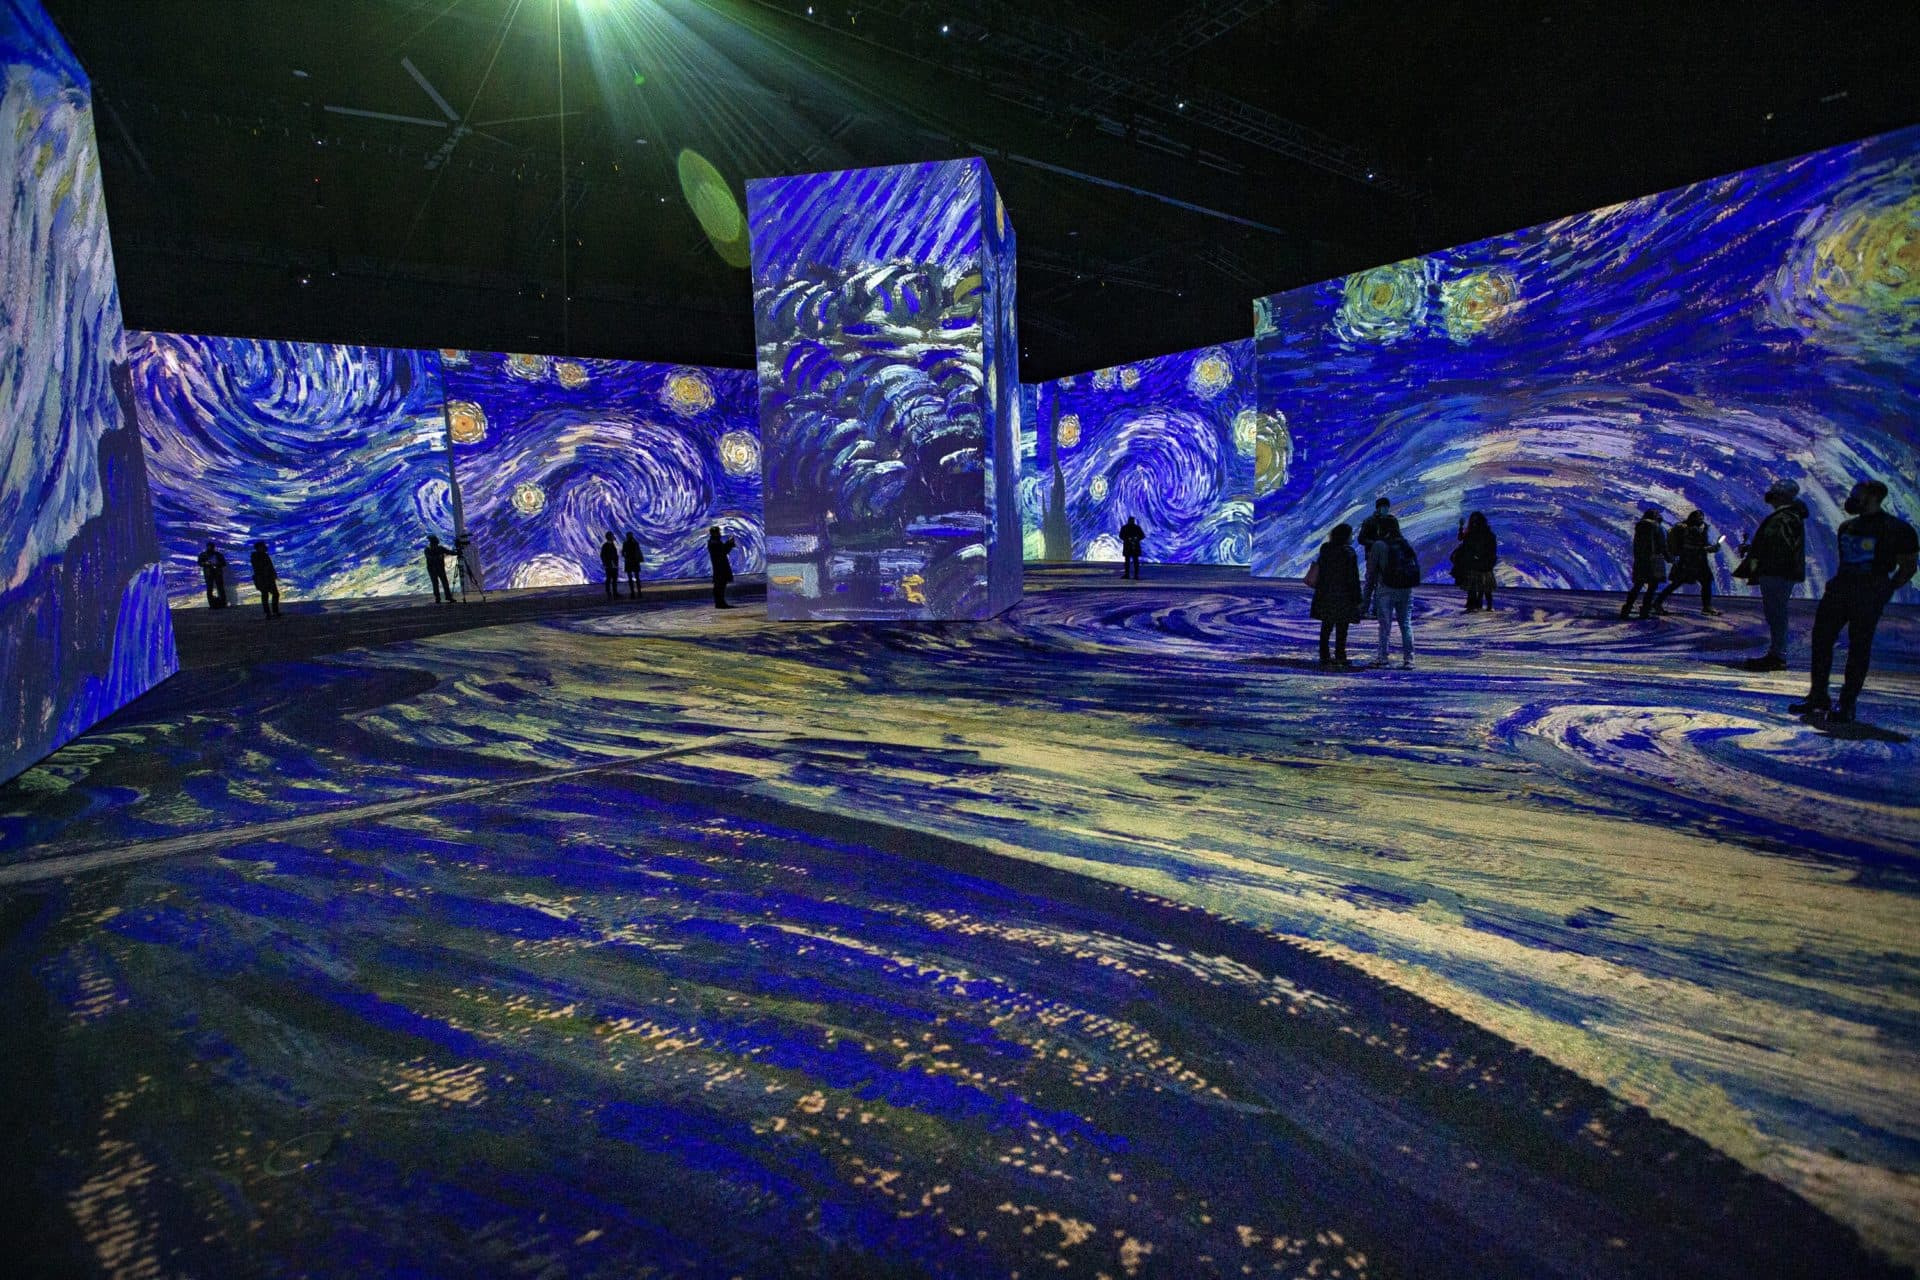 Projections of Vincent van Gogh’s "The Starry Night" flood the walls and floor and surround members of the media as they experience the press preview of “Imagine Van Gogh” at the SoWa Power Station in the South End. (Jesse Costa/WBUR)